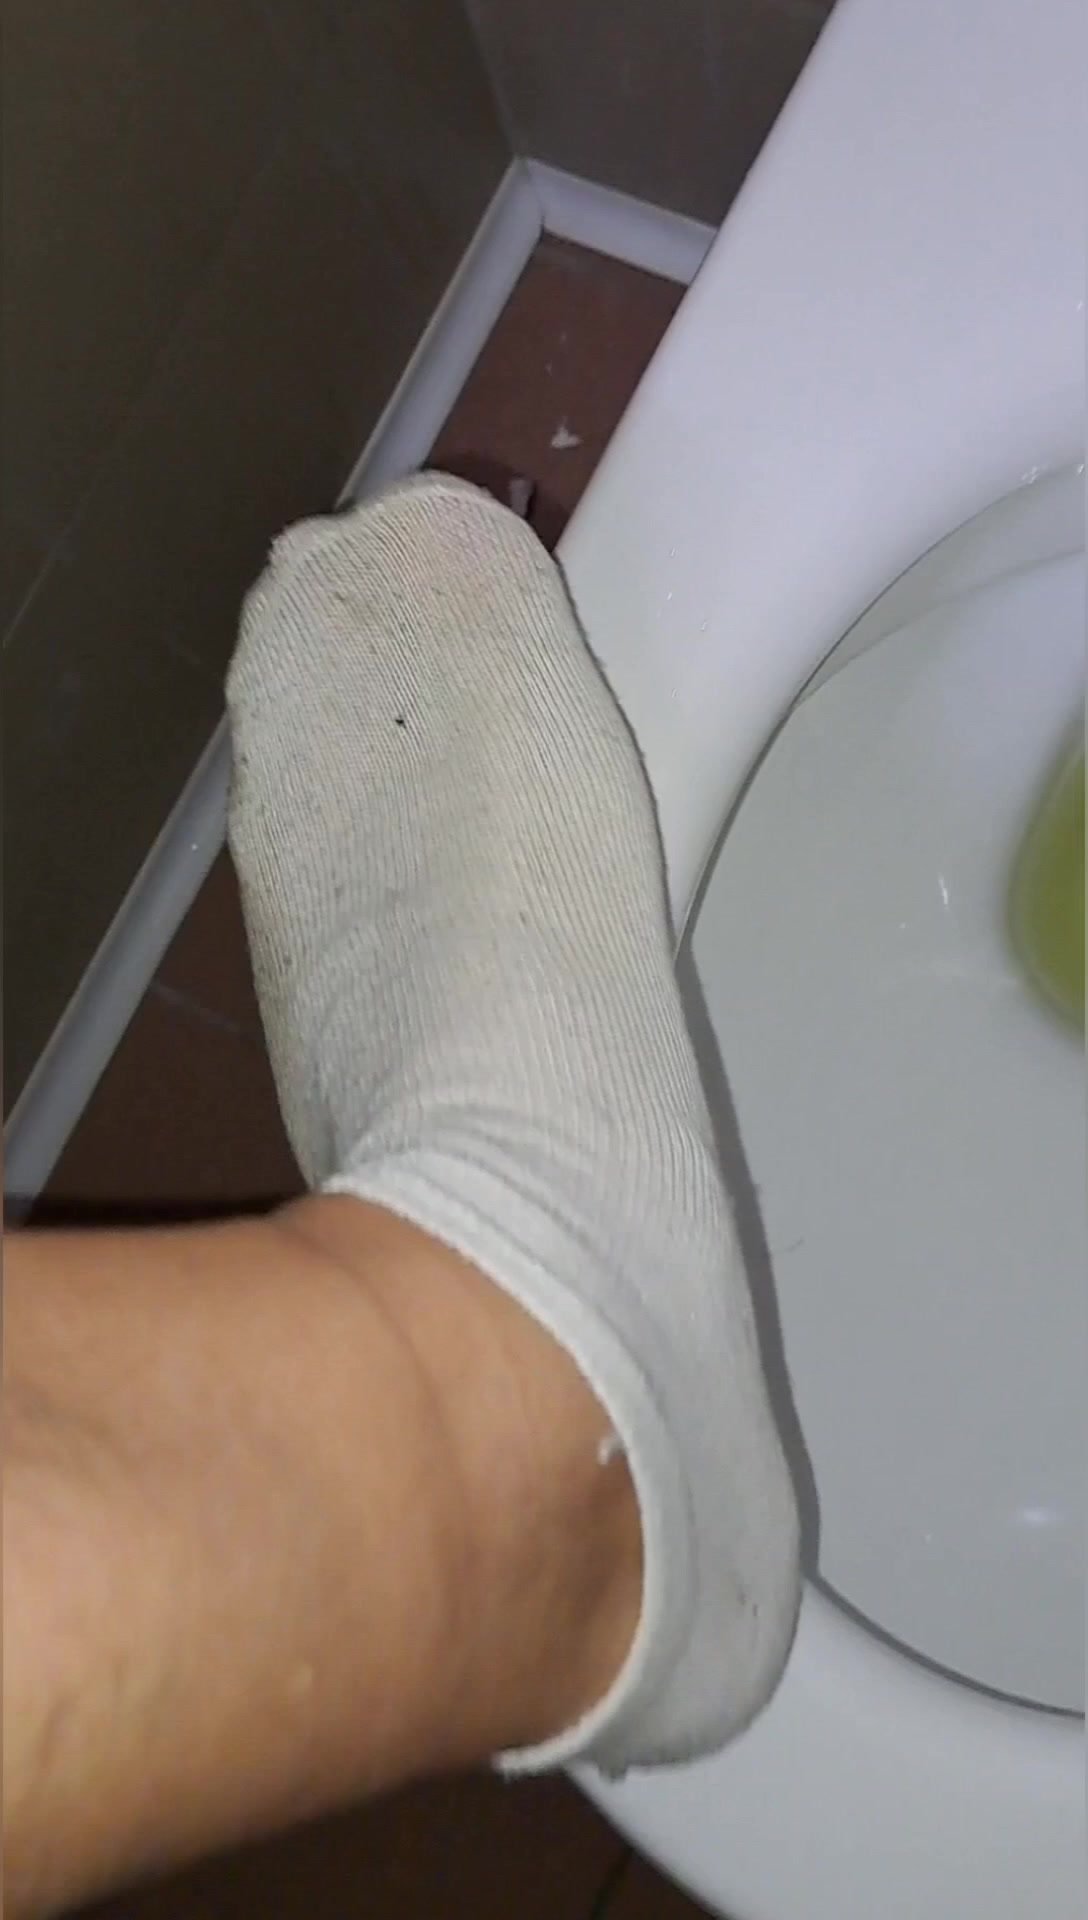 Only whit socks,for 6 days, in 6 public toilet PART 1